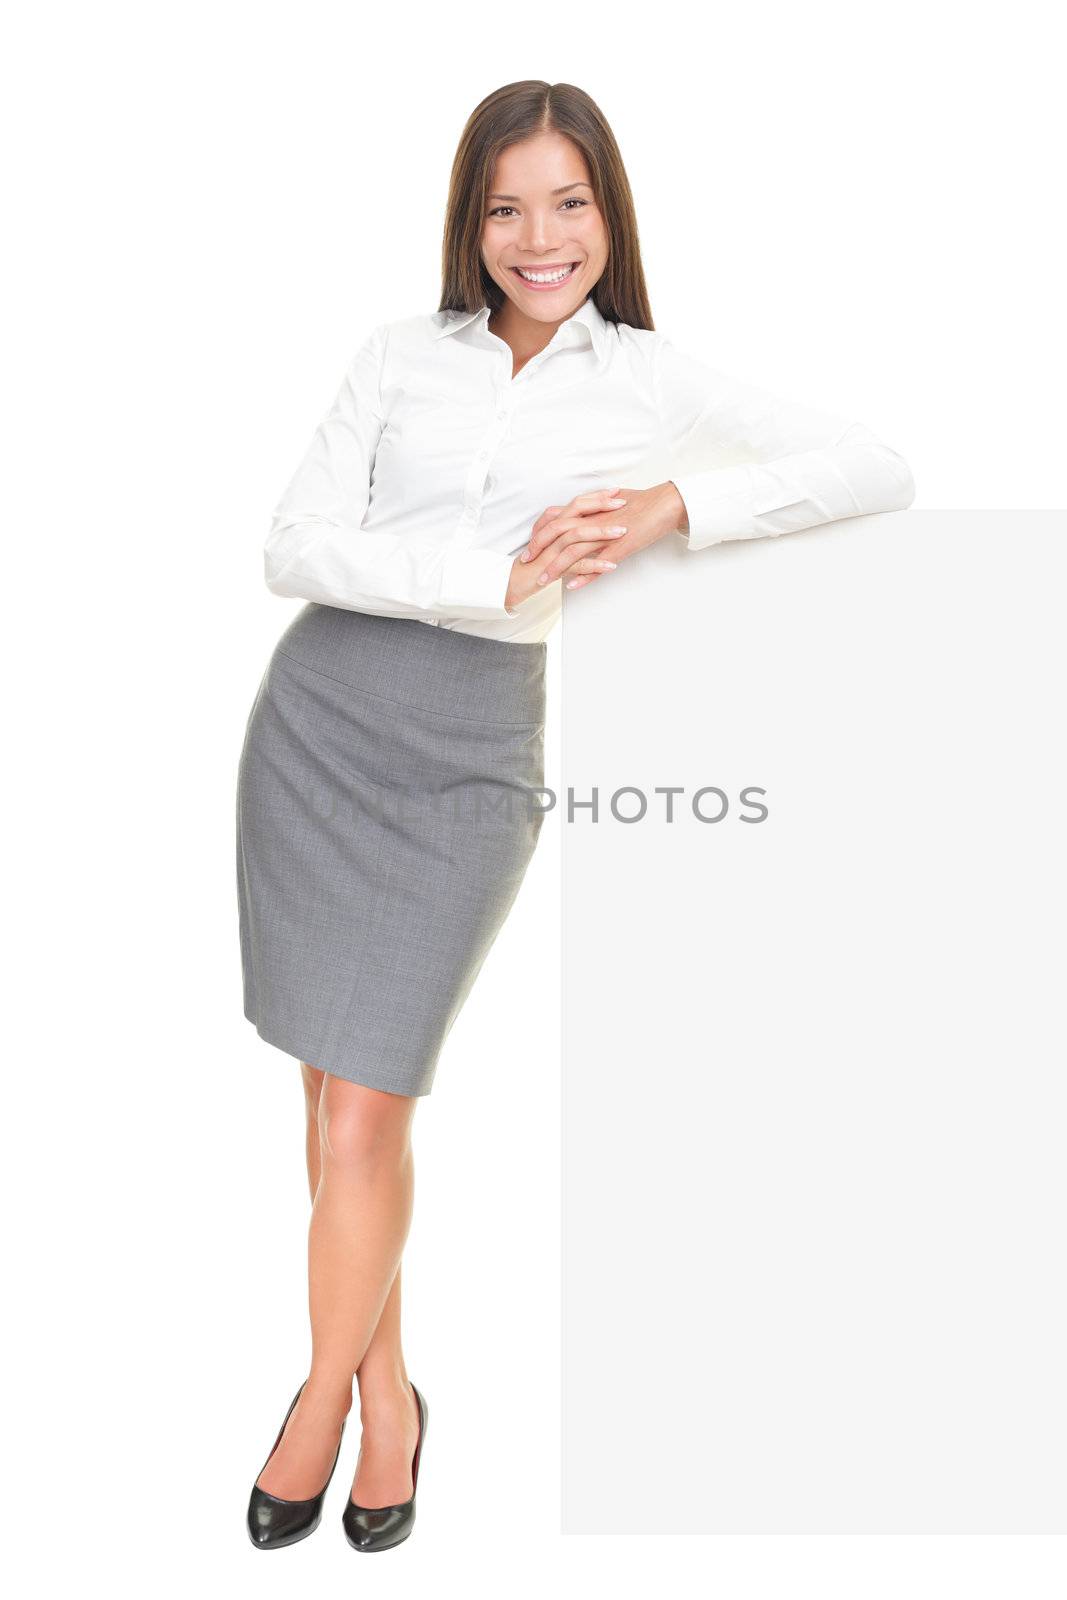 Beautiful business woman leaning on billboard sign in full length isolated over white background. Asian / Caucasian female model.